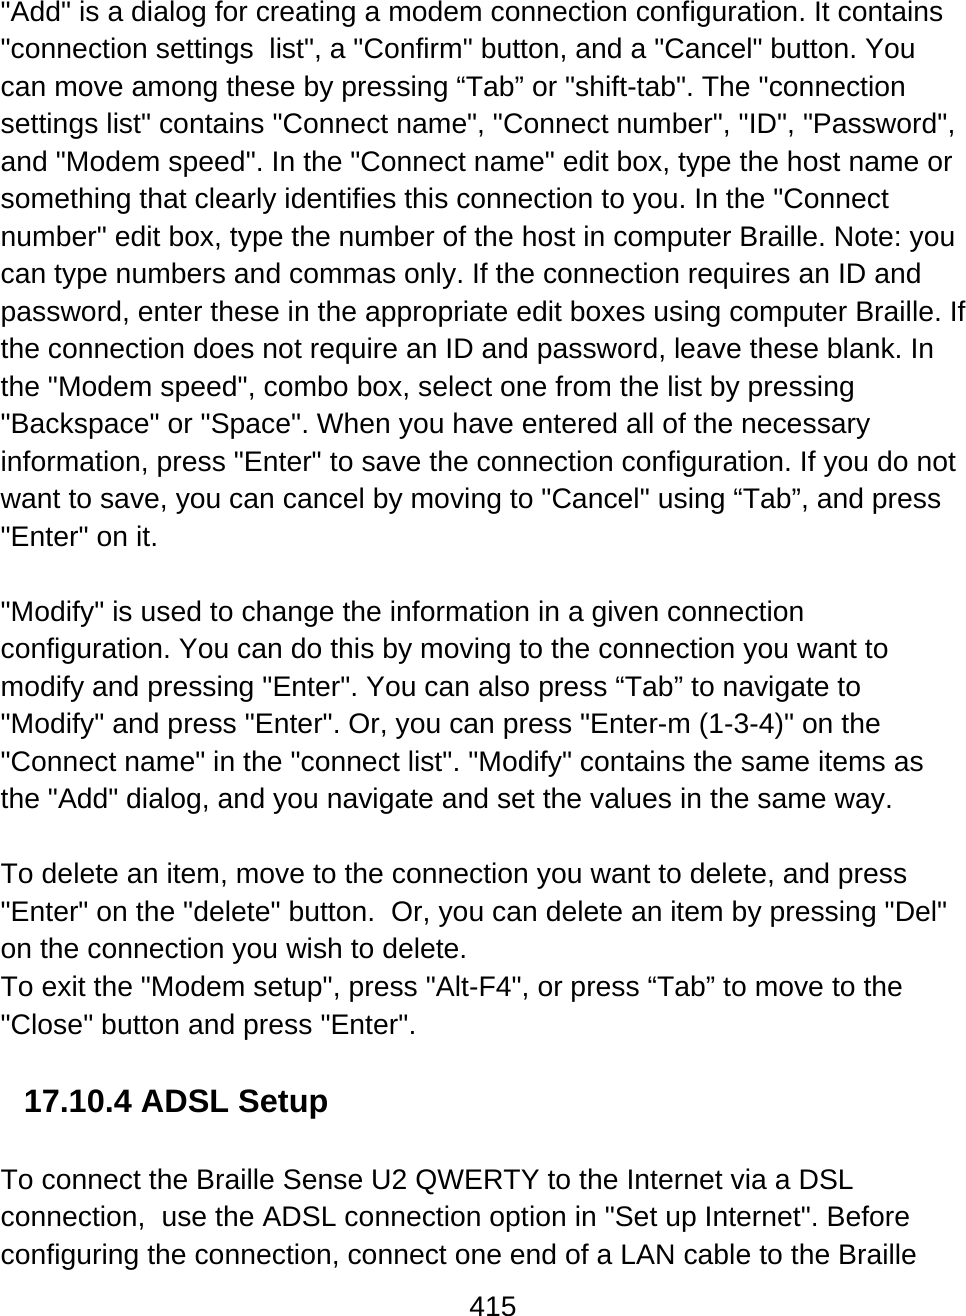 415  &quot;Add&quot; is a dialog for creating a modem connection configuration. It contains &quot;connection settings  list&quot;, a &quot;Confirm&quot; button, and a &quot;Cancel&quot; button. You can move among these by pressing “Tab” or &quot;shift-tab&quot;. The &quot;connection settings list&quot; contains &quot;Connect name&quot;, &quot;Connect number&quot;, &quot;ID&quot;, &quot;Password&quot;, and &quot;Modem speed&quot;. In the &quot;Connect name&quot; edit box, type the host name or something that clearly identifies this connection to you. In the &quot;Connect number&quot; edit box, type the number of the host in computer Braille. Note: you can type numbers and commas only. If the connection requires an ID and password, enter these in the appropriate edit boxes using computer Braille. If the connection does not require an ID and password, leave these blank. In the &quot;Modem speed&quot;, combo box, select one from the list by pressing &quot;Backspace&quot; or &quot;Space&quot;. When you have entered all of the necessary information, press &quot;Enter&quot; to save the connection configuration. If you do not want to save, you can cancel by moving to &quot;Cancel&quot; using “Tab”, and press &quot;Enter&quot; on it.  &quot;Modify&quot; is used to change the information in a given connection configuration. You can do this by moving to the connection you want to modify and pressing &quot;Enter&quot;. You can also press “Tab” to navigate to &quot;Modify&quot; and press &quot;Enter&quot;. Or, you can press &quot;Enter-m (1-3-4)&quot; on the &quot;Connect name&quot; in the &quot;connect list&quot;. &quot;Modify&quot; contains the same items as the &quot;Add&quot; dialog, and you navigate and set the values in the same way.  To delete an item, move to the connection you want to delete, and press &quot;Enter&quot; on the &quot;delete&quot; button.  Or, you can delete an item by pressing &quot;Del&quot; on the connection you wish to delete.  To exit the &quot;Modem setup&quot;, press &quot;Alt-F4&quot;, or press “Tab” to move to the &quot;Close&quot; button and press &quot;Enter&quot;.   17.10.4 ADSL Setup  To connect the Braille Sense U2 QWERTY to the Internet via a DSL connection,  use the ADSL connection option in &quot;Set up Internet&quot;. Before configuring the connection, connect one end of a LAN cable to the Braille 